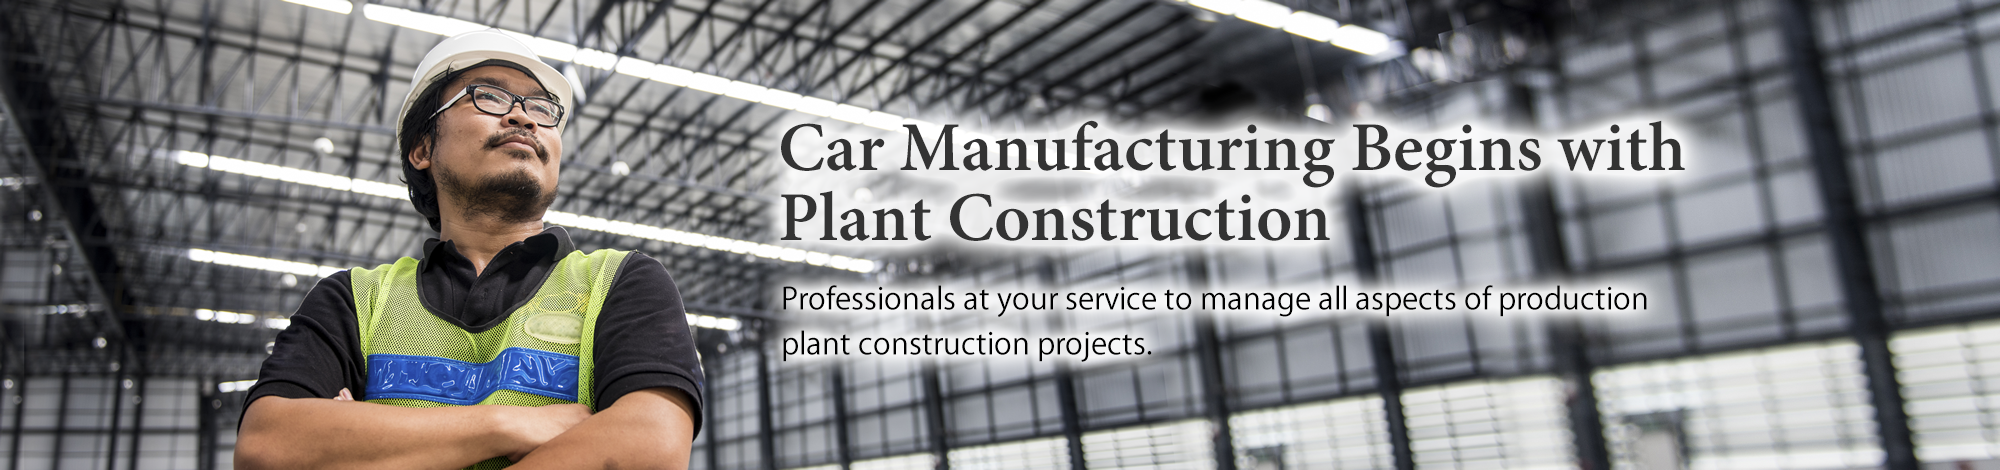 Car Manufacturing Begins with Plant Construction